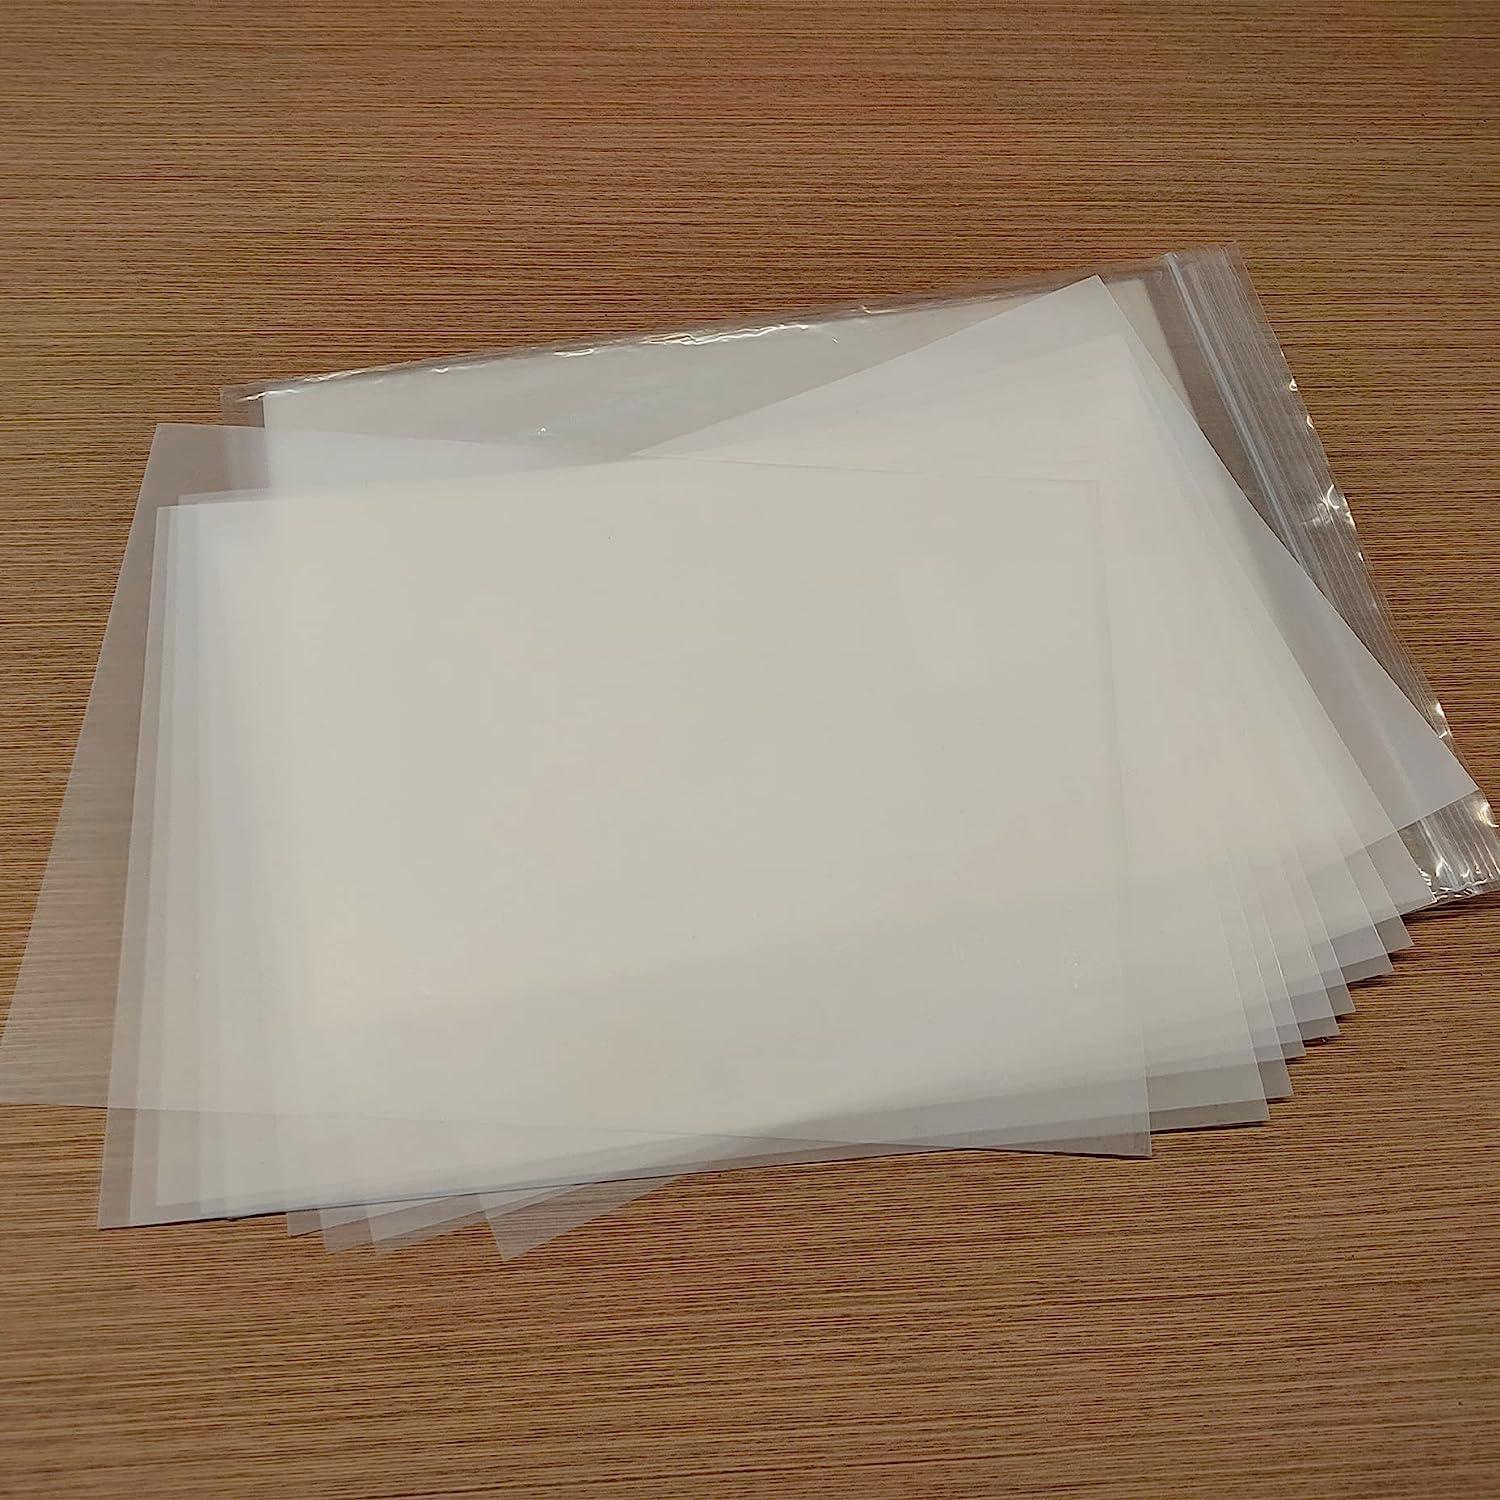  AOSORW 50 Sheets Dtf Transfer Film, Direct to Film